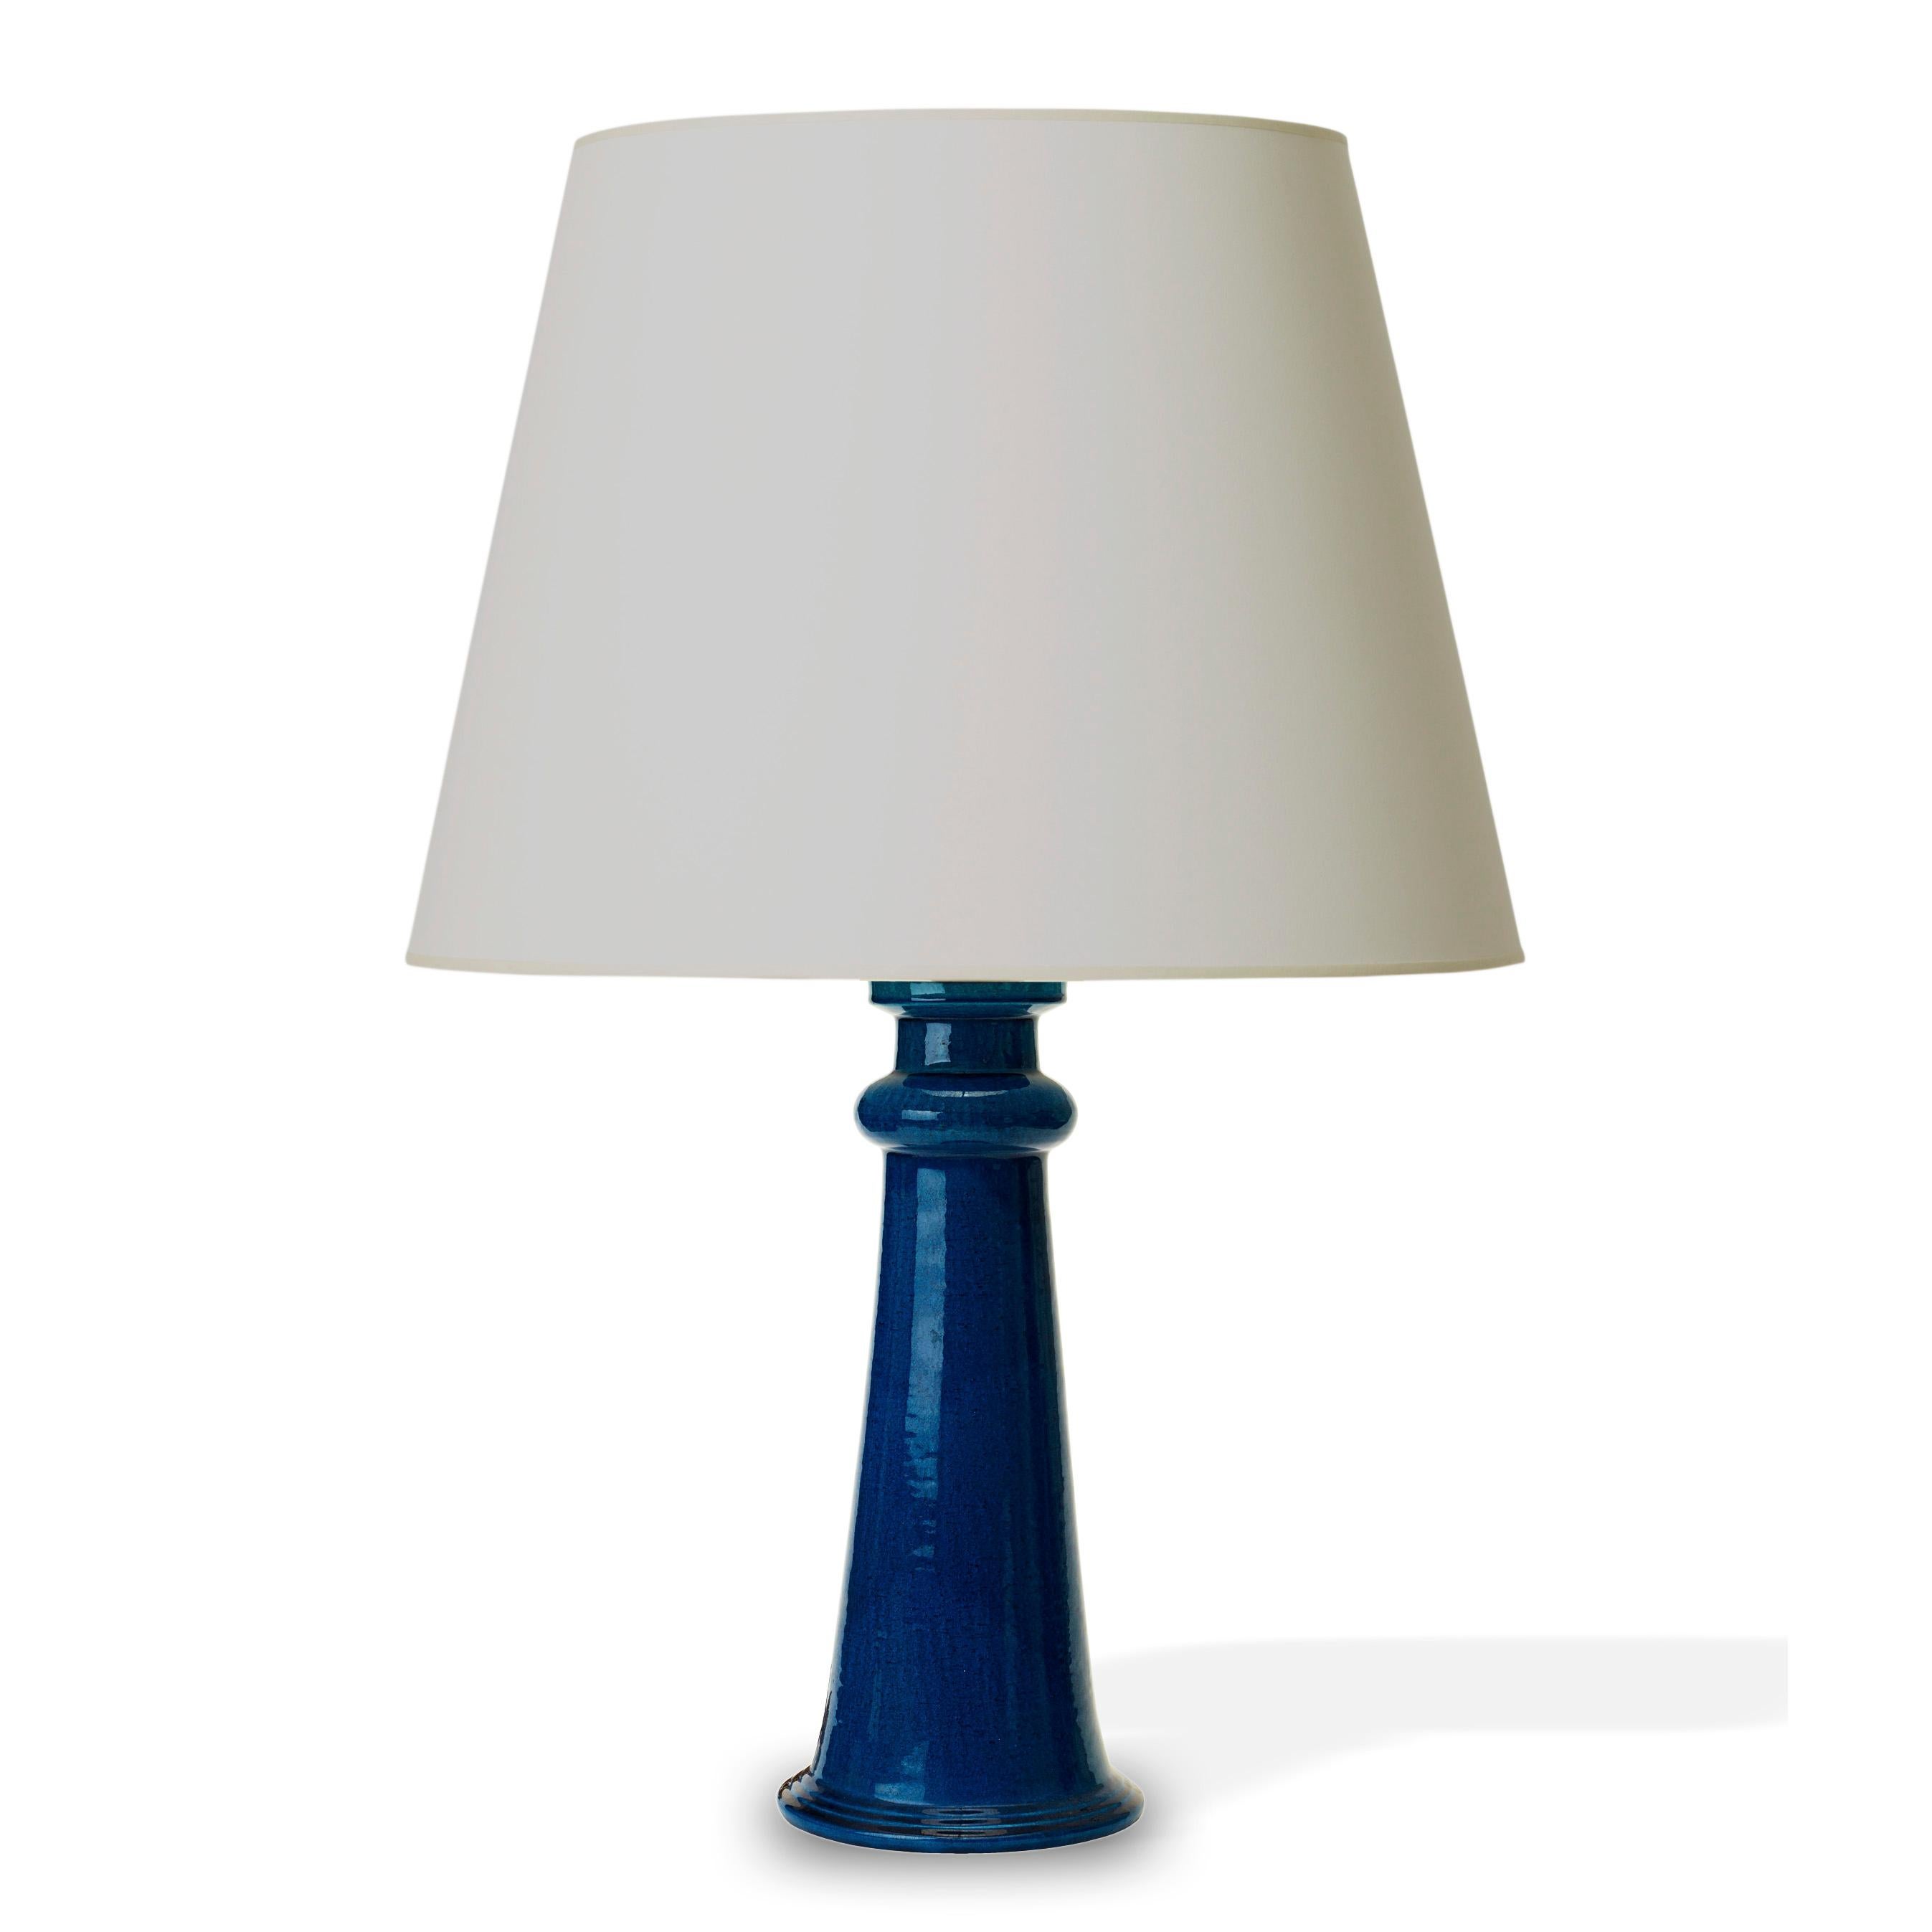 Spectacular Monumental Pair of Table Lamps in a Saturated Azure by Nils Kähler (Skandinavische Moderne) im Angebot